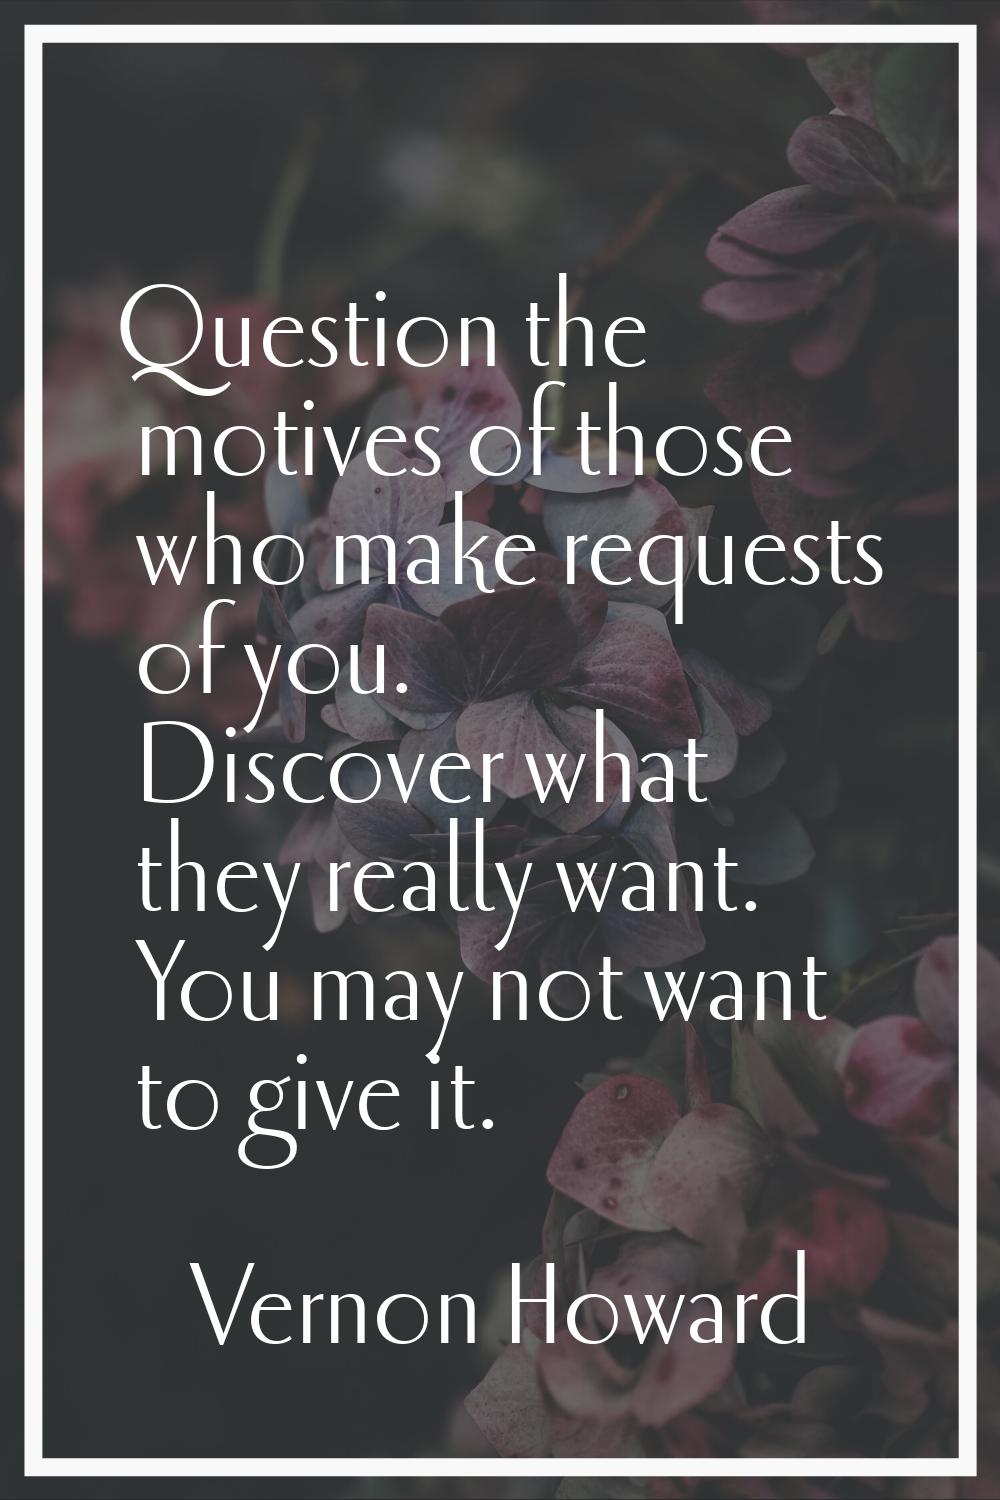 Question the motives of those who make requests of you. Discover what they really want. You may not